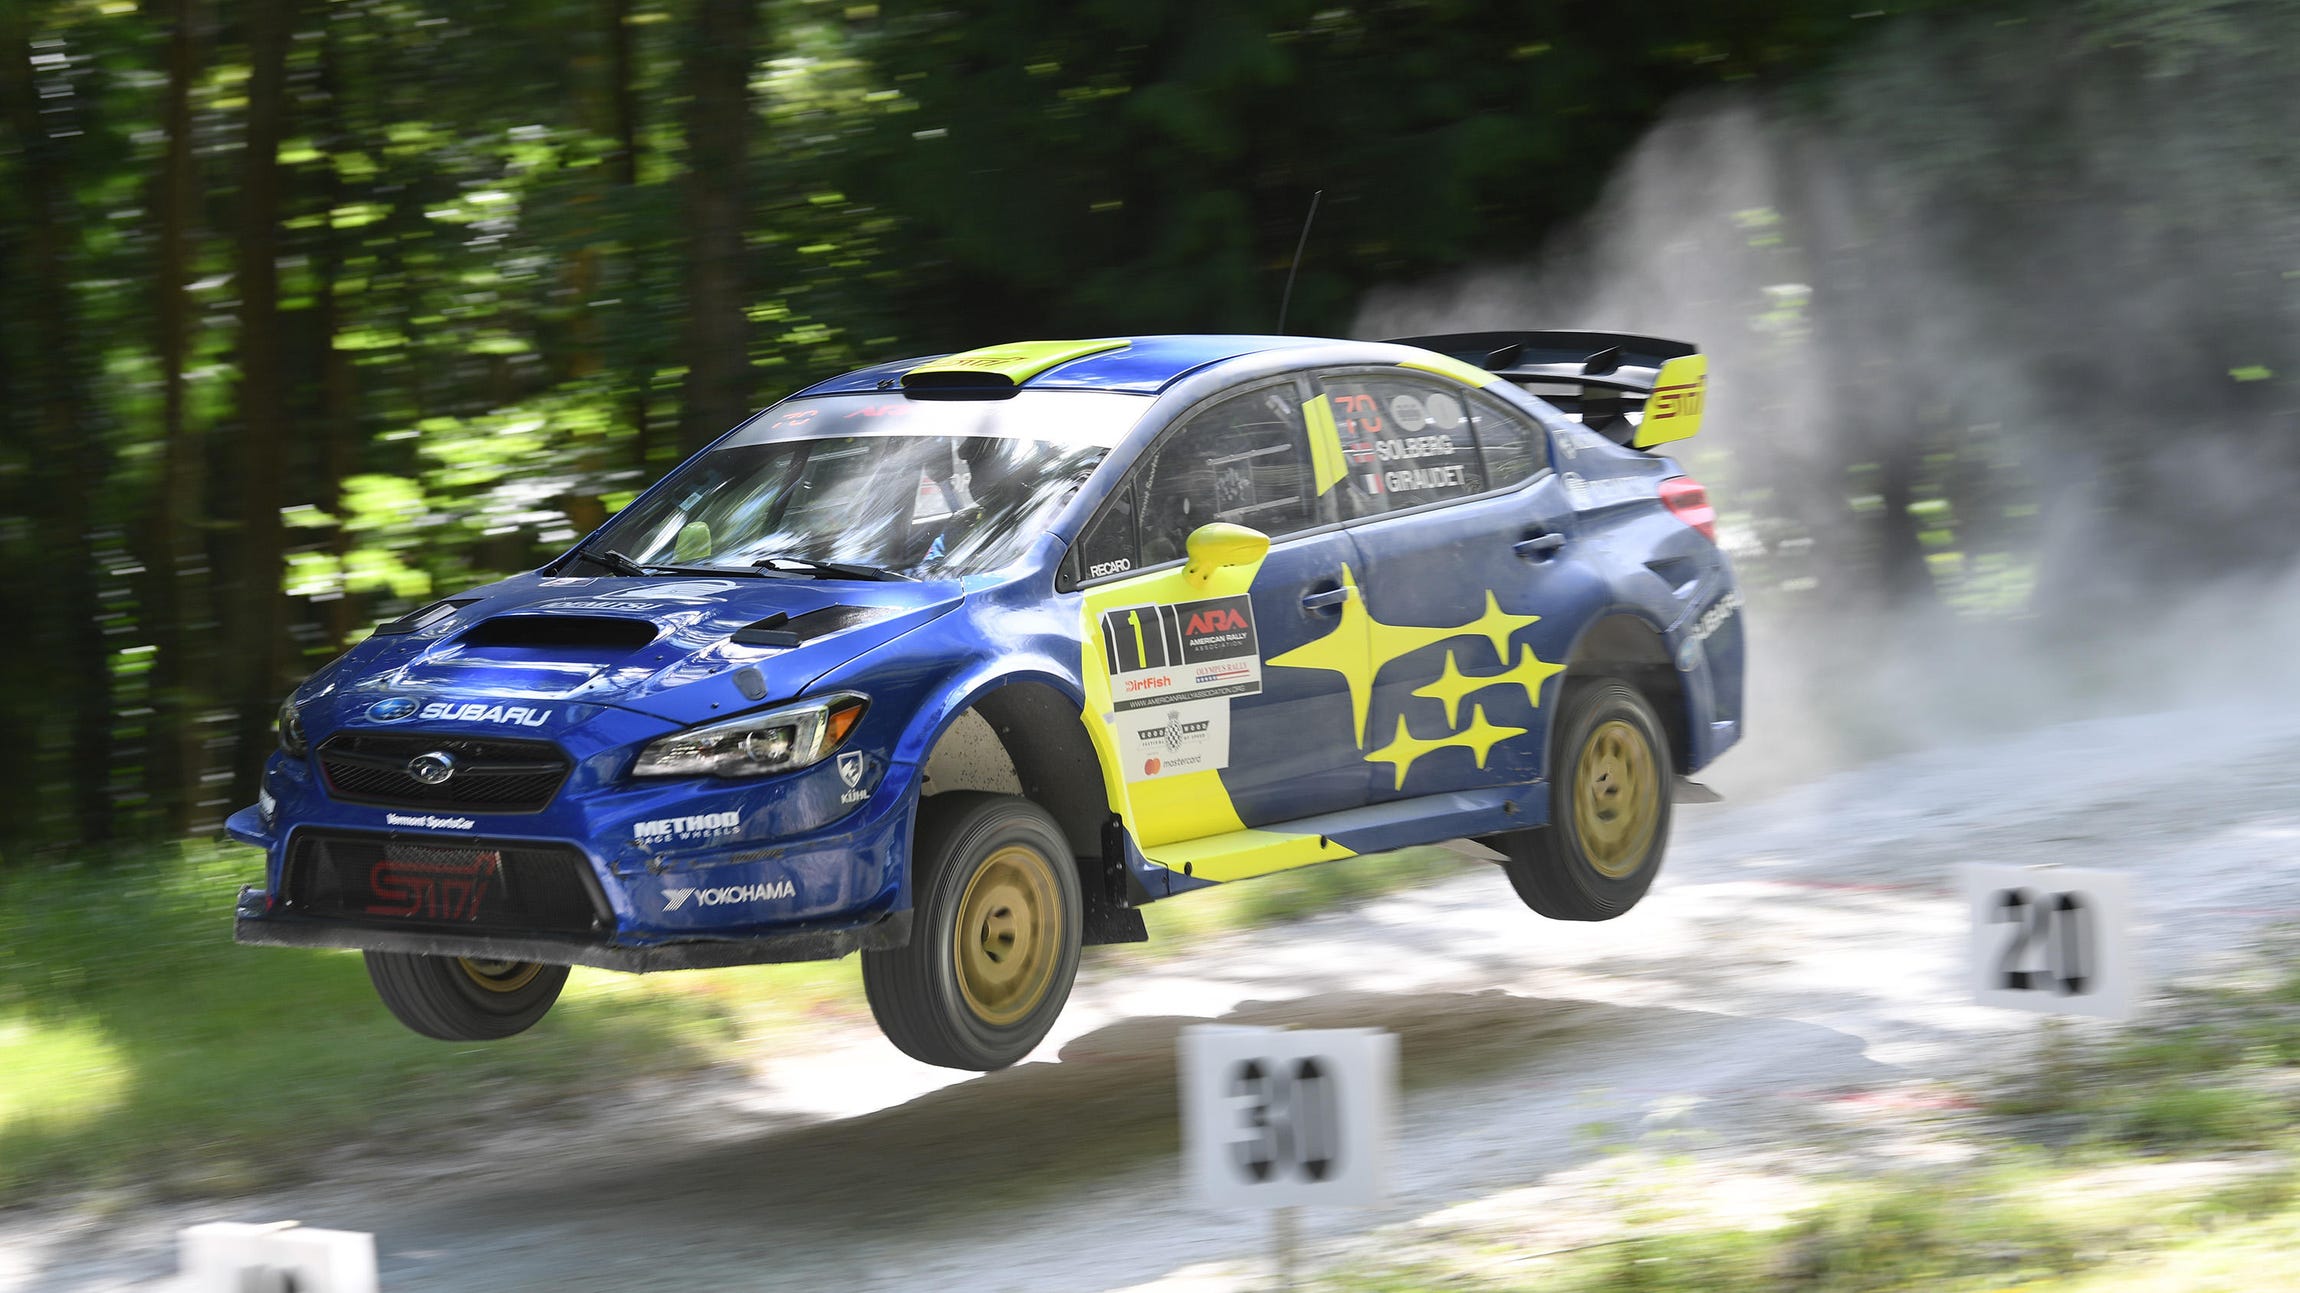 Subaru at the Goodwood Rally Stage